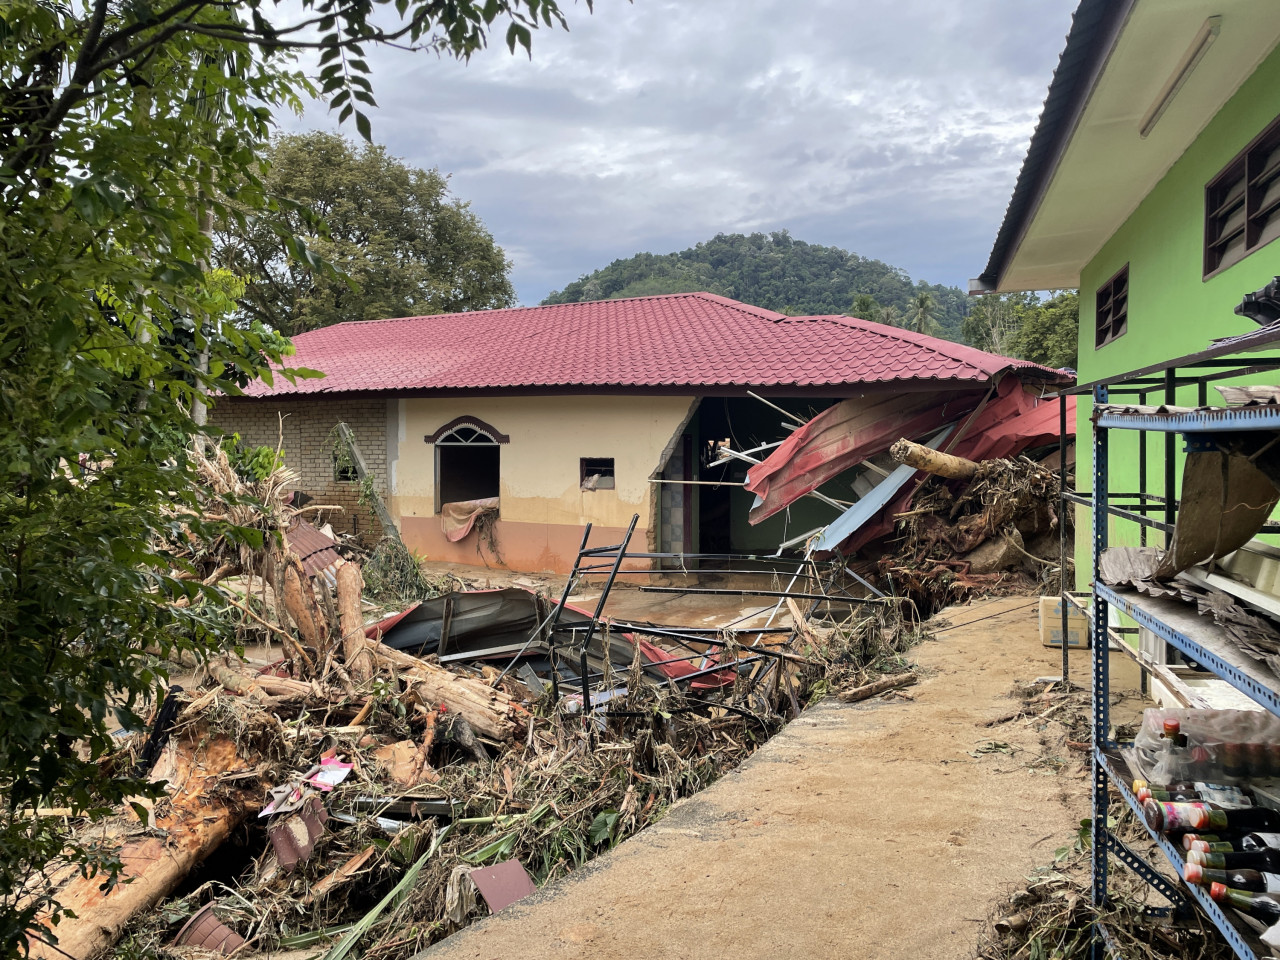 A house in terrible condition after being hit by mud from the flood. – SOFIA NASIR/The Vibes pic, July 5, 2022